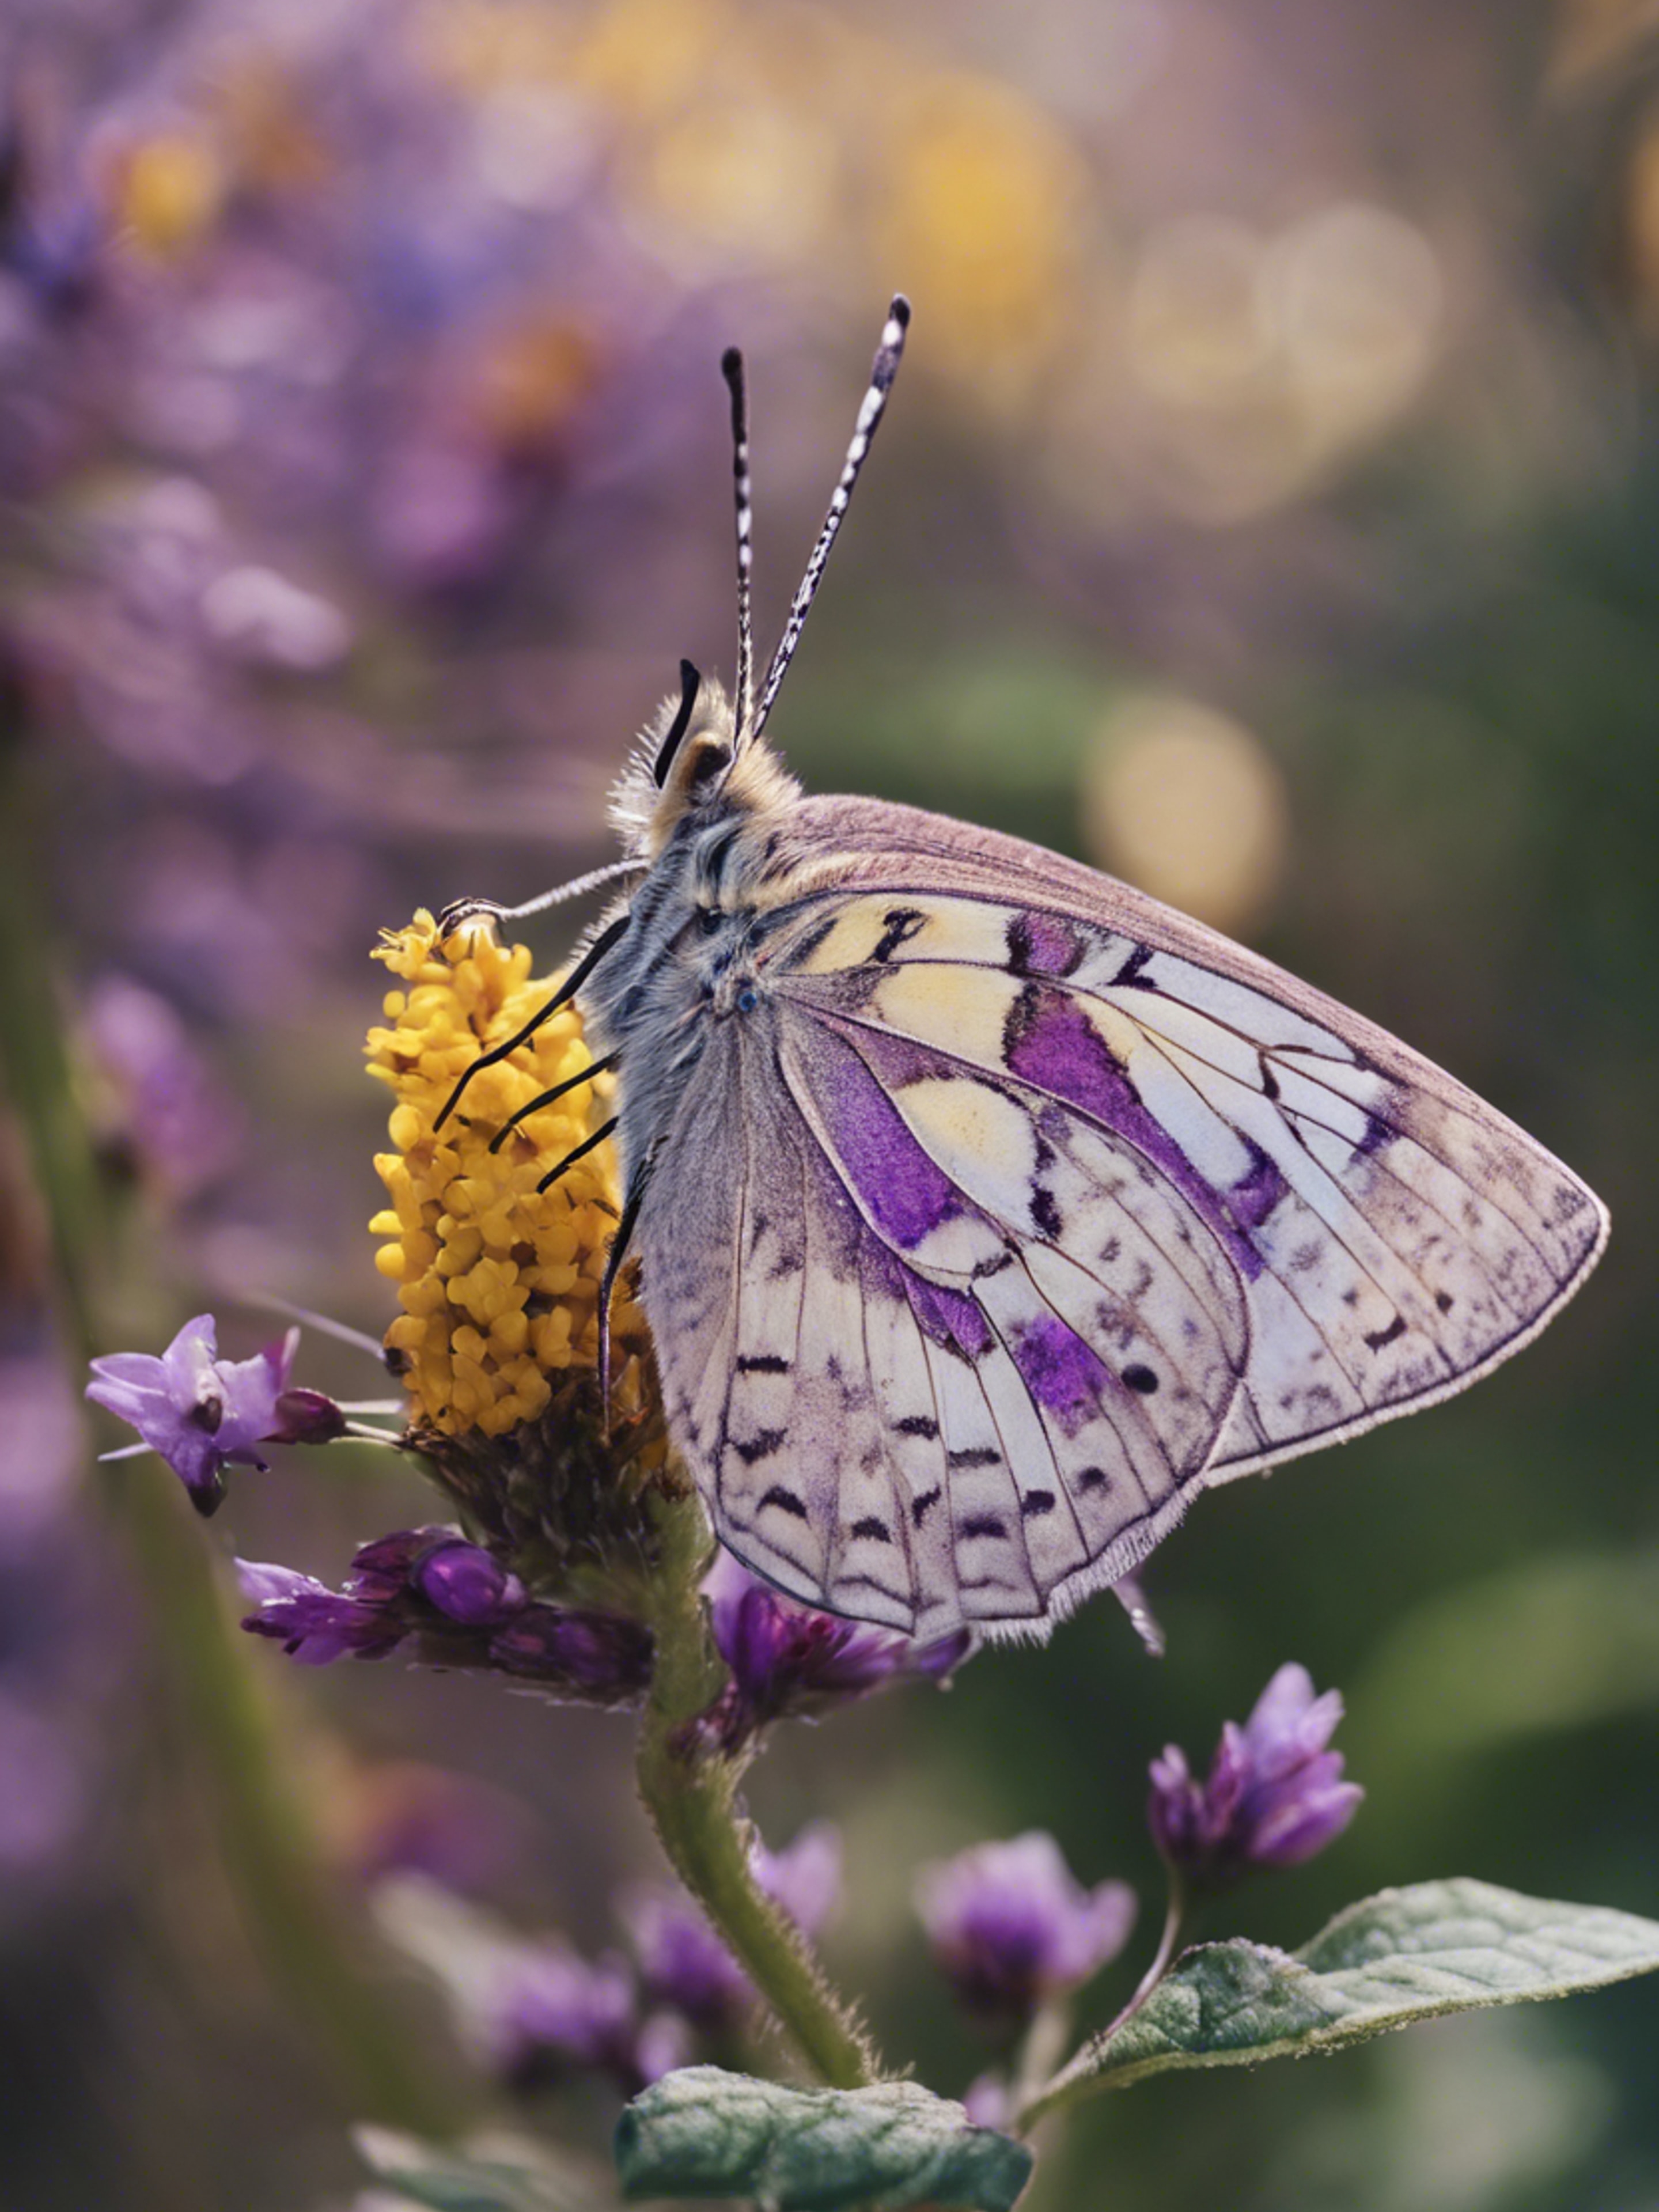 A beautiful butterfly with detailed purple and yellow wings resting on a blooming flower. Tapet[3e976ae7be264a5da695]